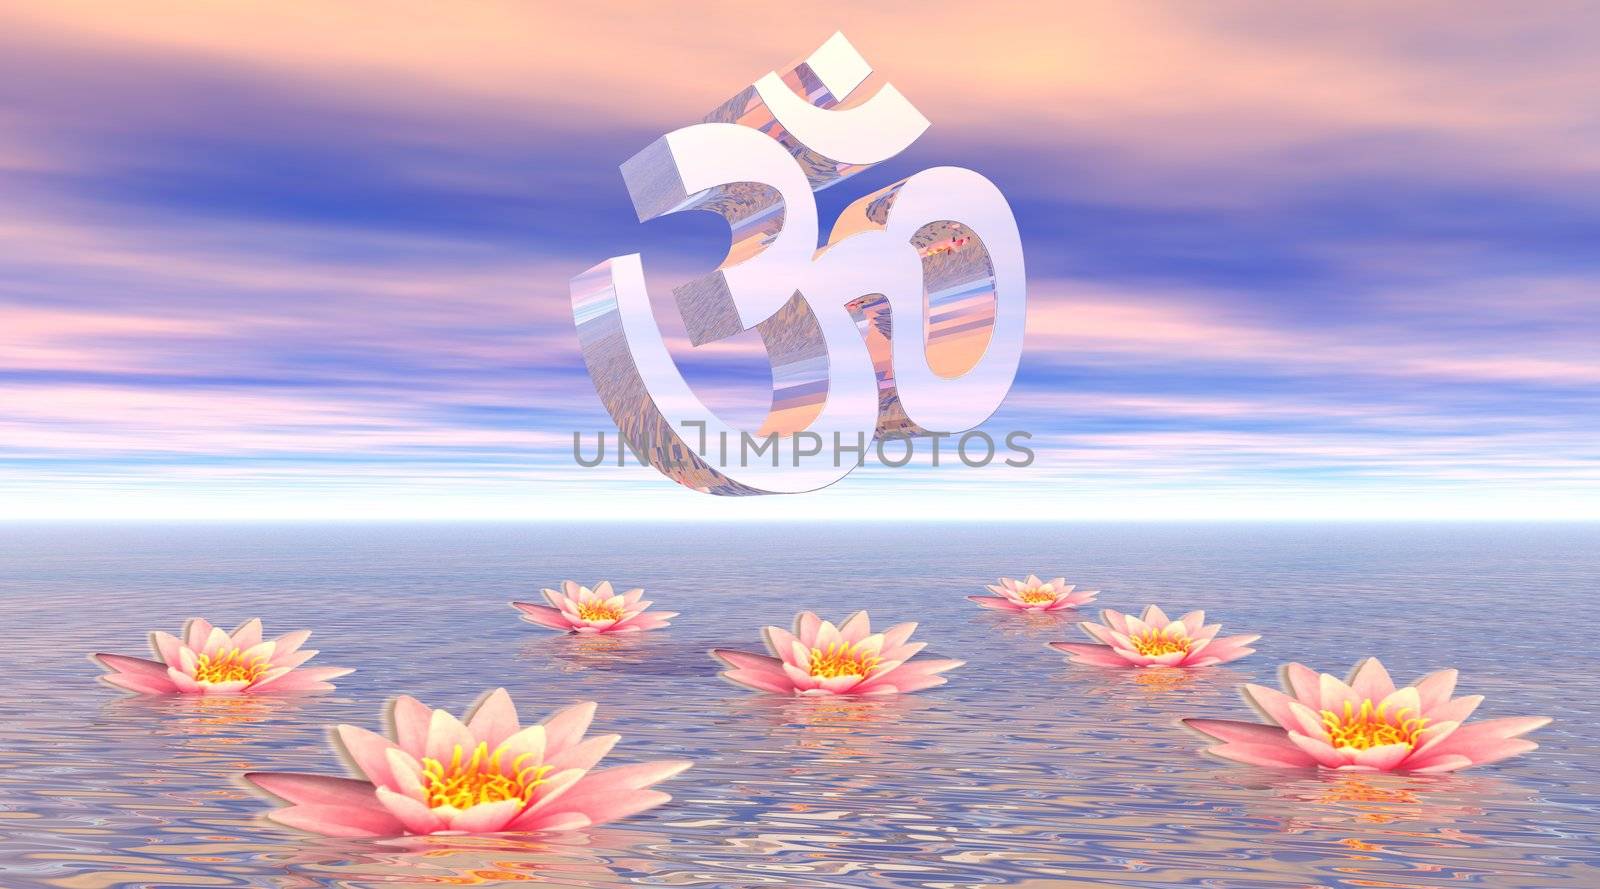 Metallic aum - om upon quiet ocean and several beautiful pink lotus flowers by sunset with pink clouds